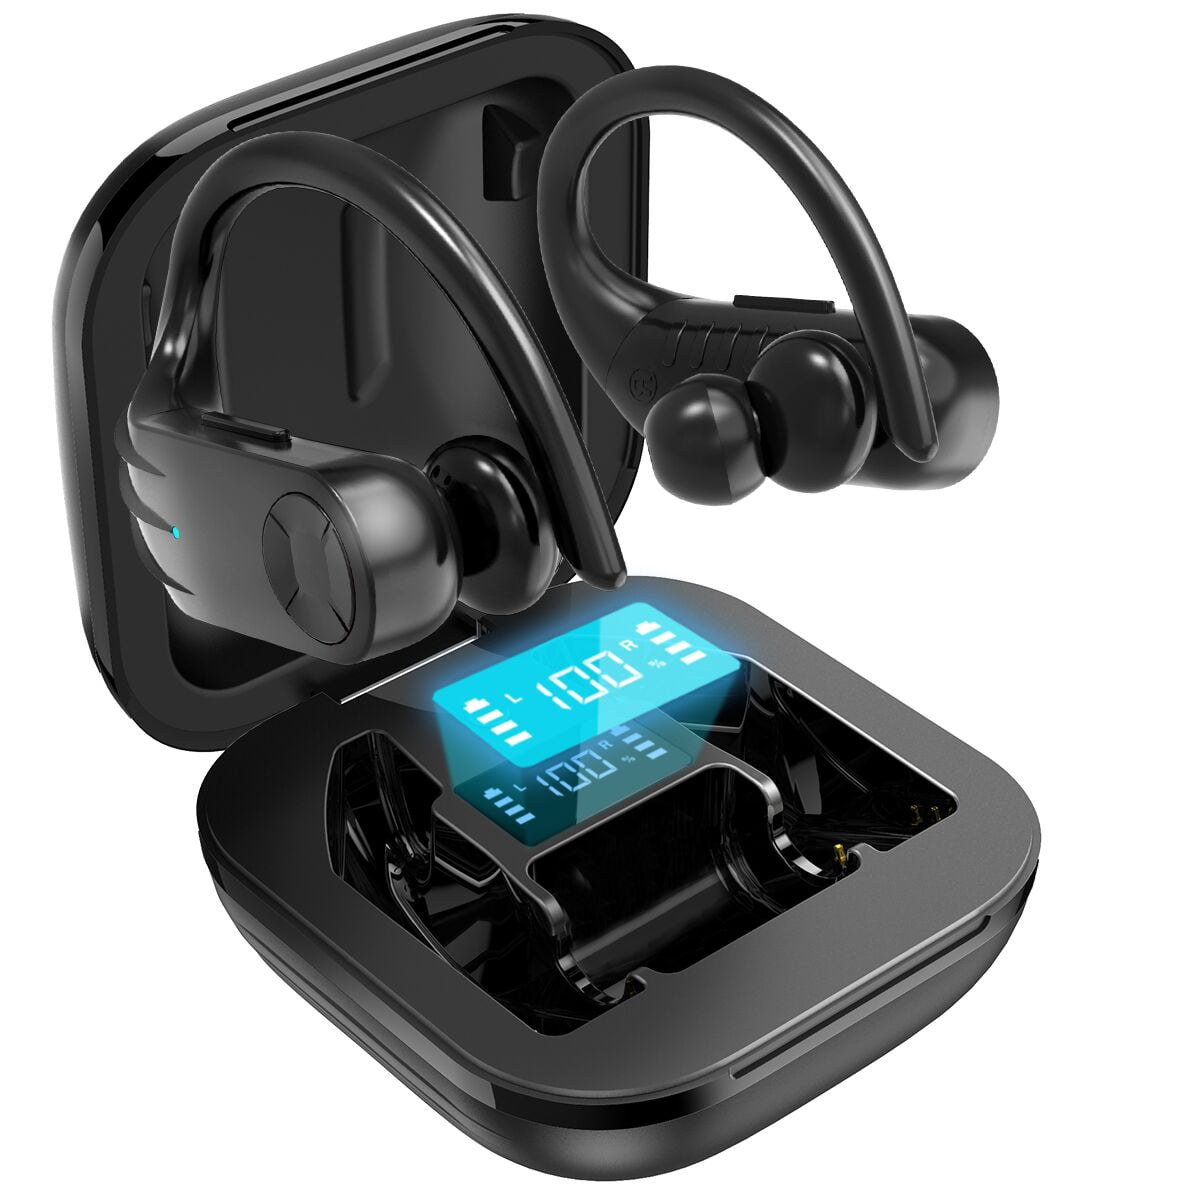 Wireless Earbuds Bluetooth 5.0 Headphones Sweat-Proof Sports in-Ear Headphones Android Compatible with iPhone Laptop and Smart Devices 